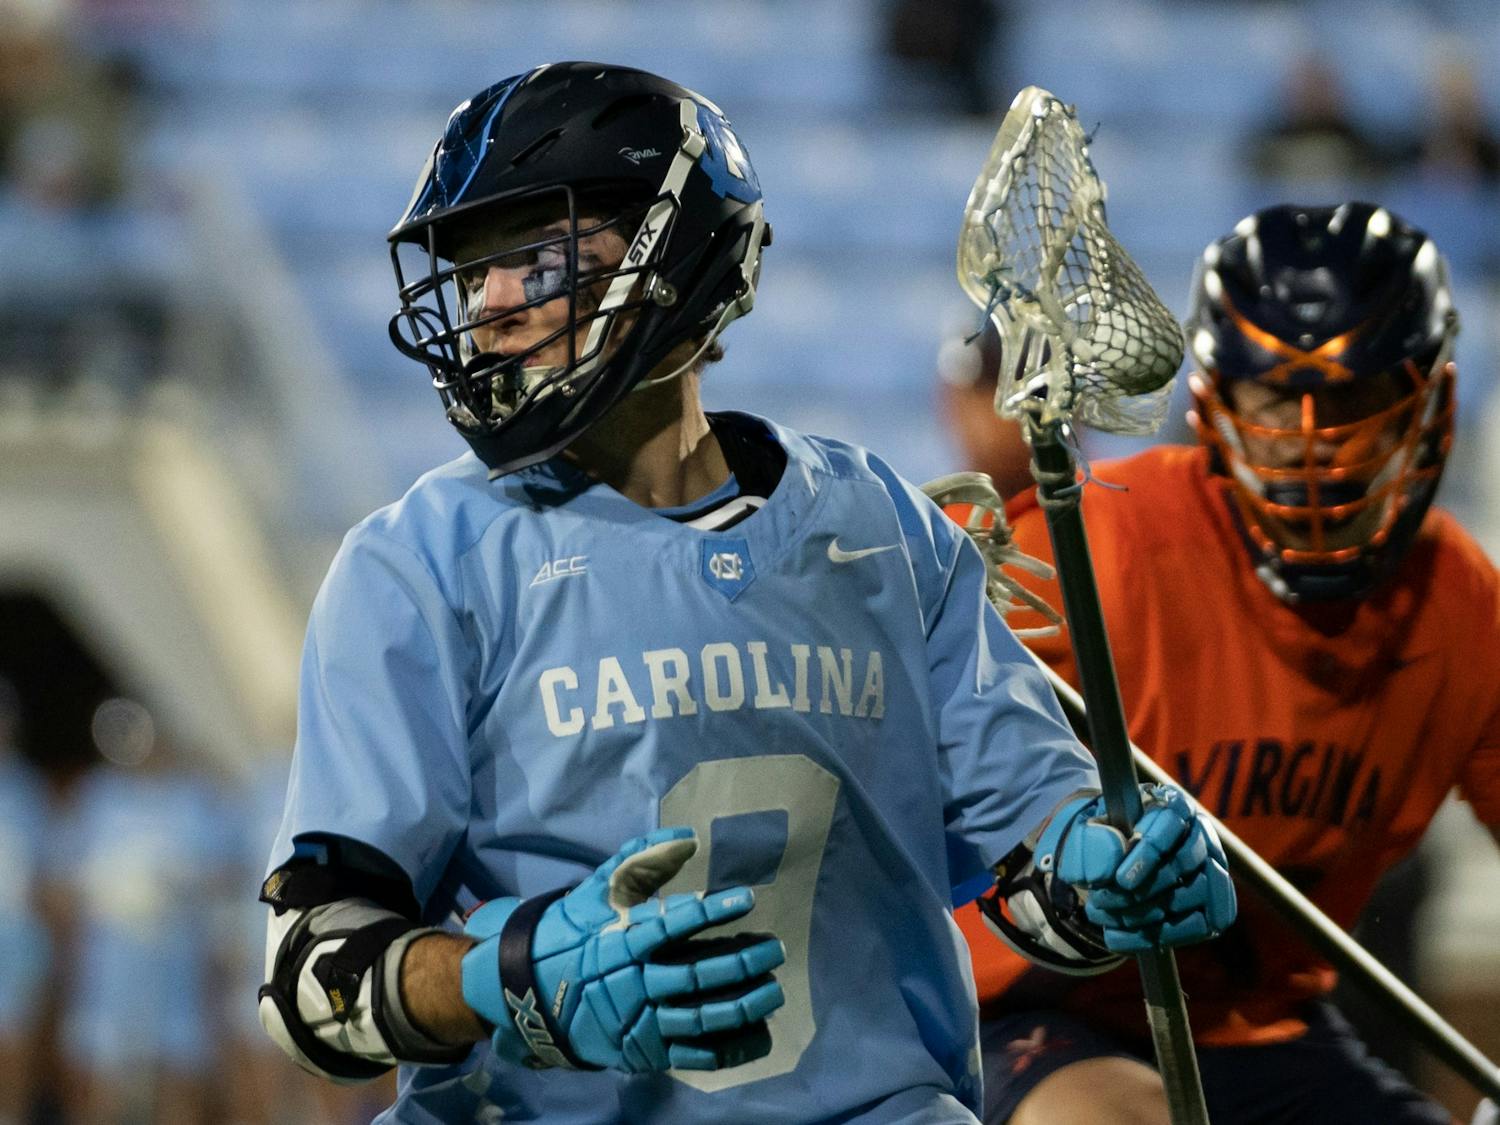 Senior attackman Jacob Kelly (9) cradles the ball during a men's lacrosse game on Dorrance Field against UVA on Thursday, Mar.10, 2022. UNC lost 11-15.